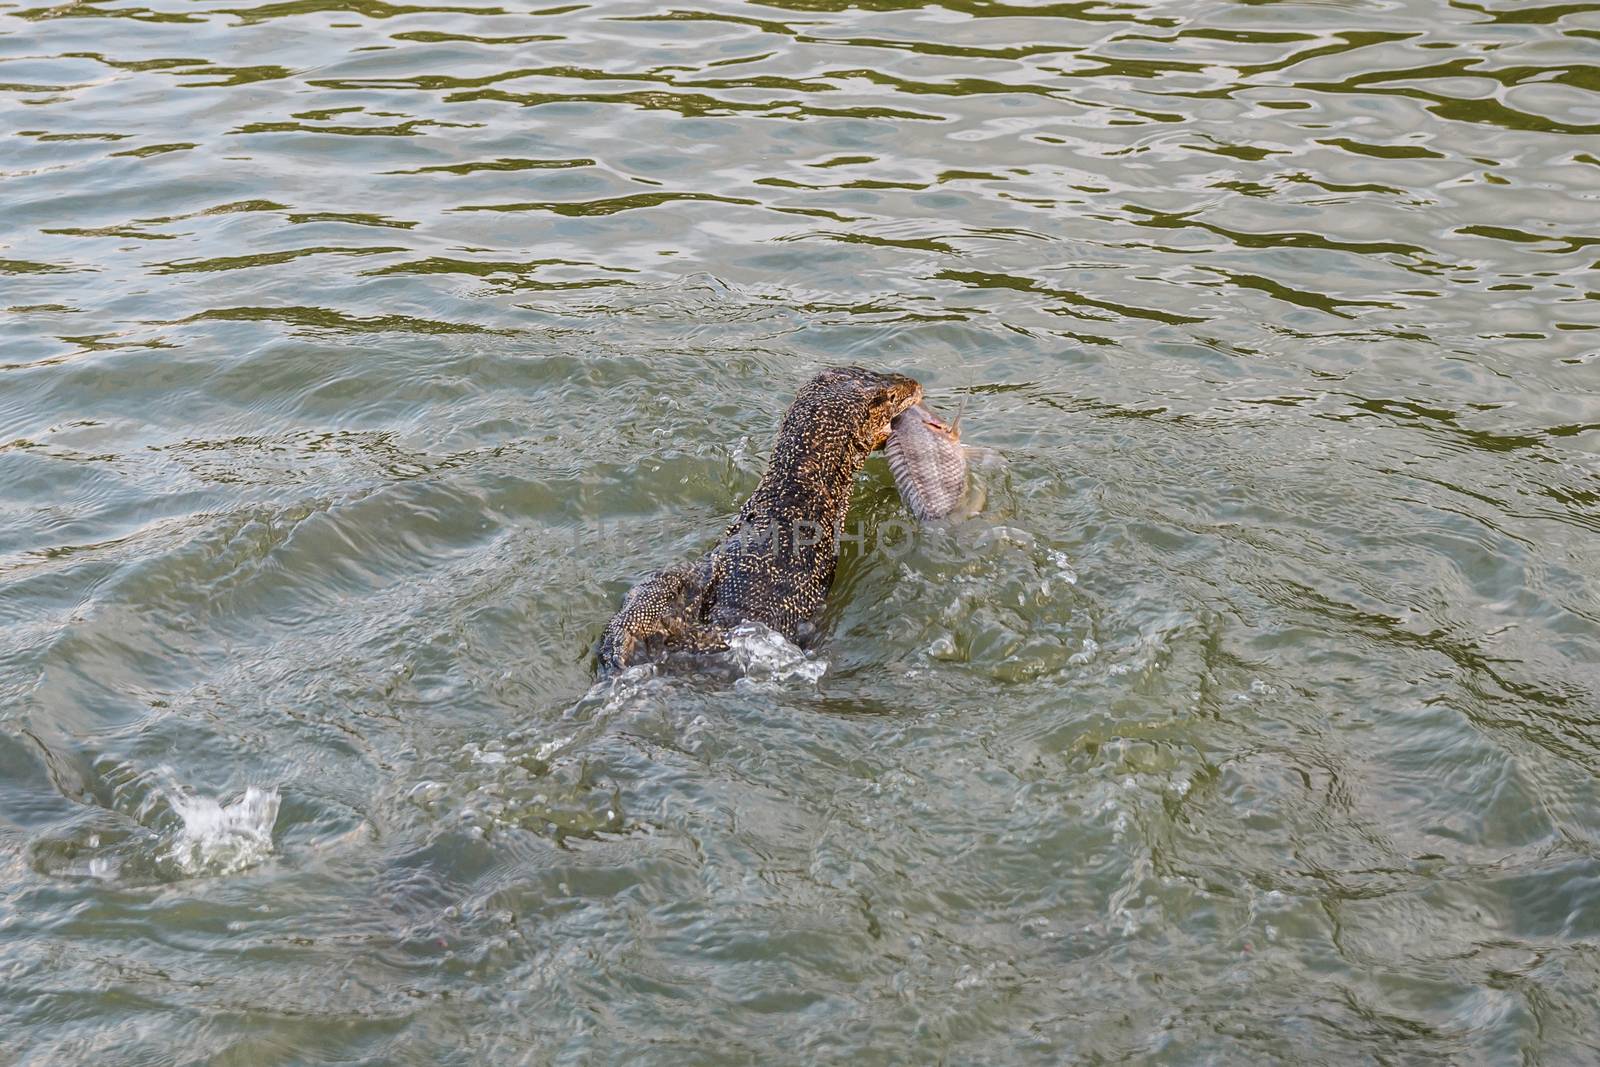 Monitor lizard swimming and hunting fish with it mouth.